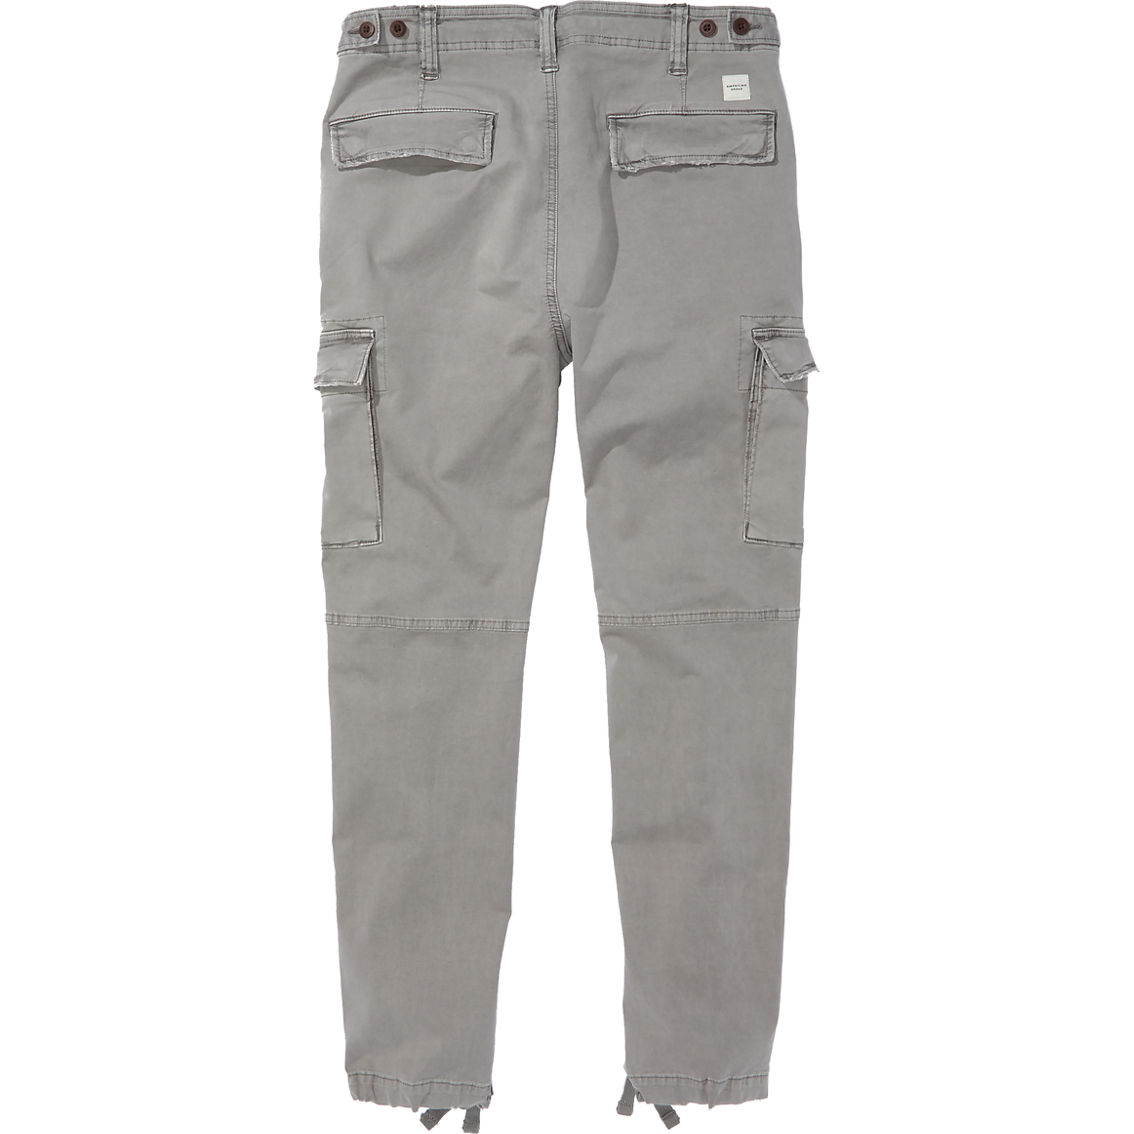 American Eagle AE Flex Slim Lived-In Cargo Pants - Image 5 of 5